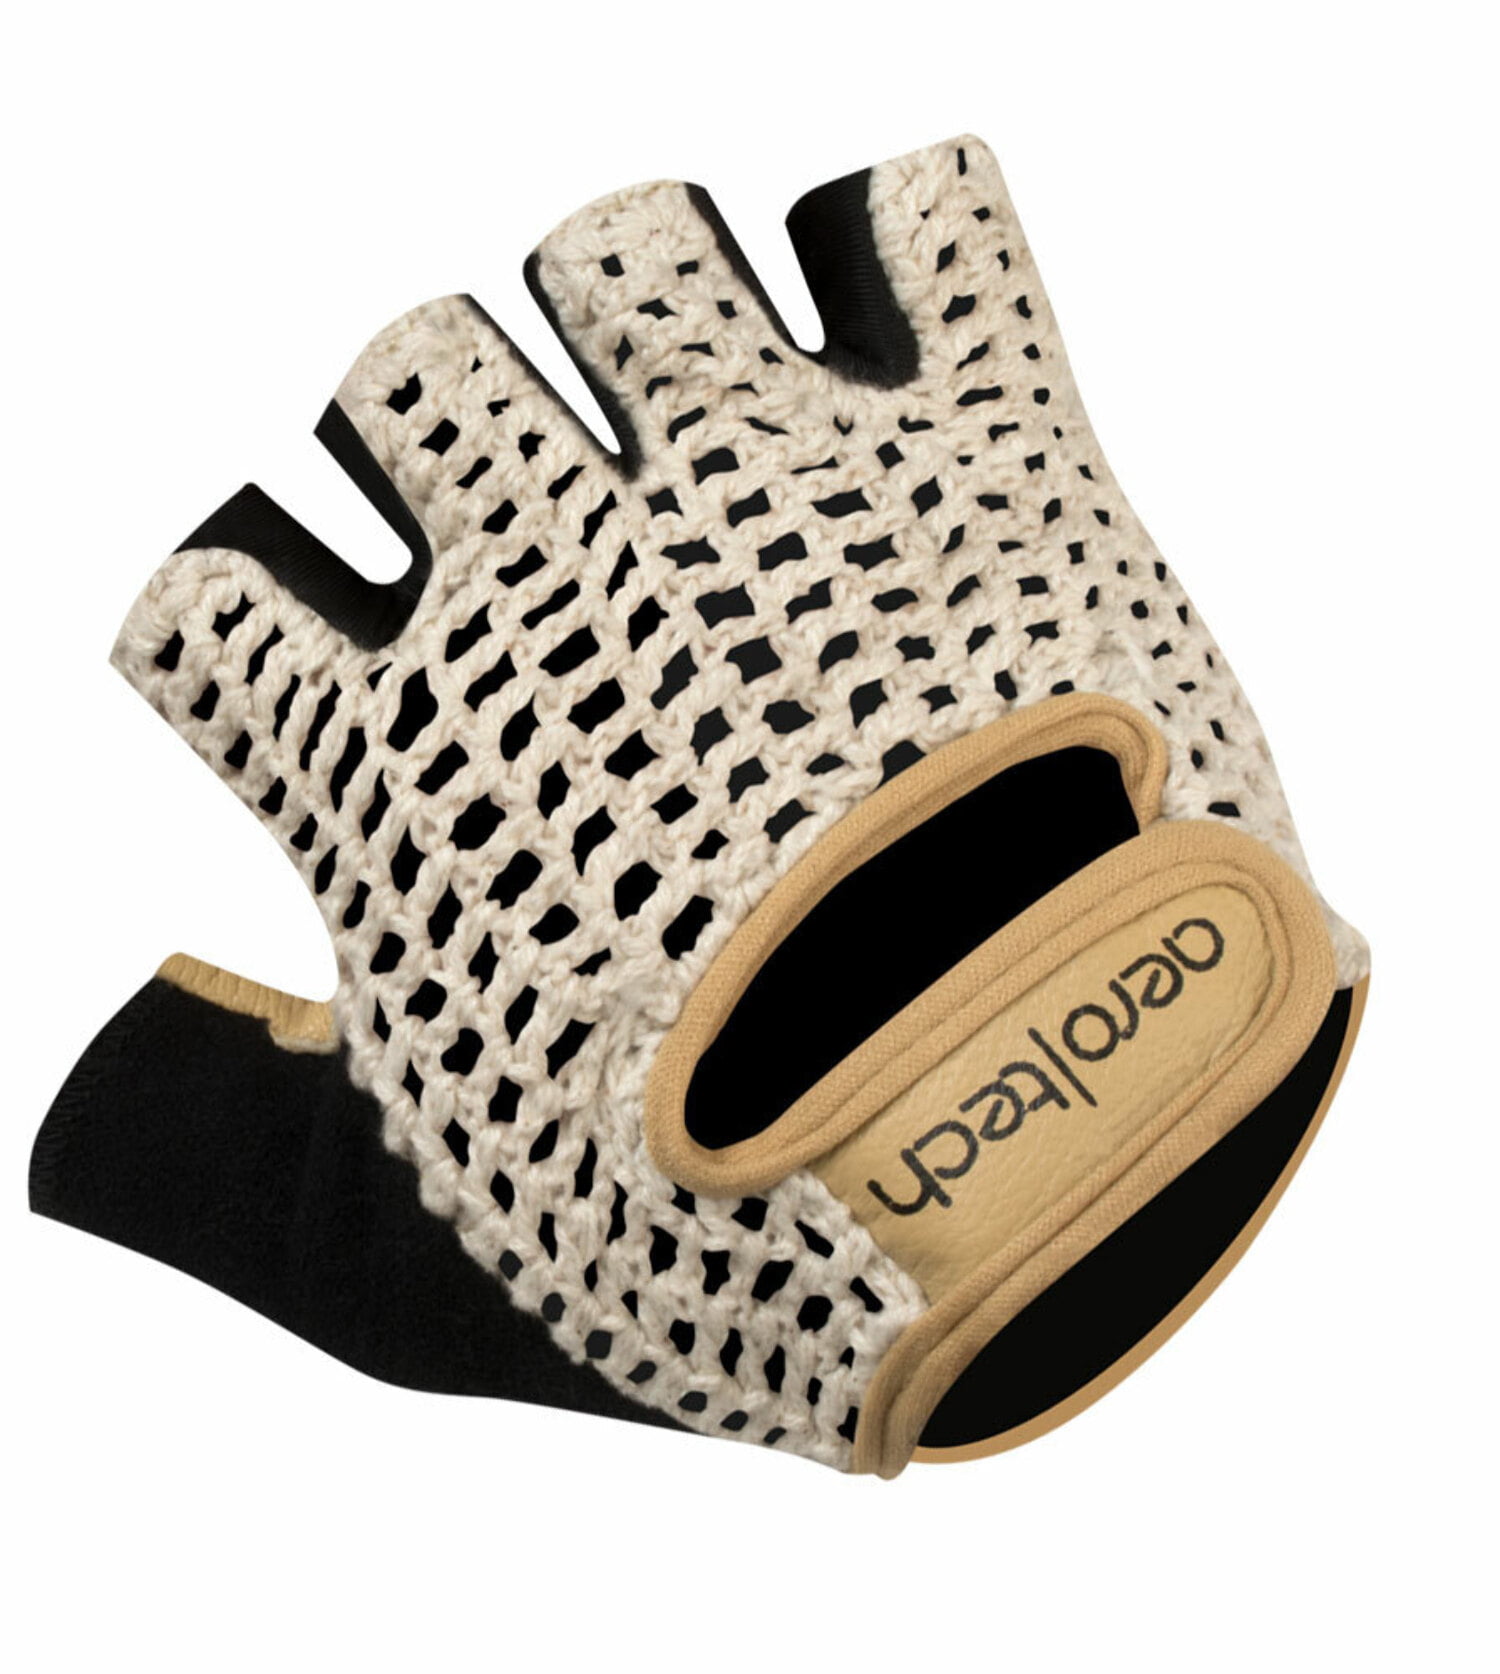 Aero Tech Cycling Gloves - Extra Thick Gel Padding Leather/Cotton